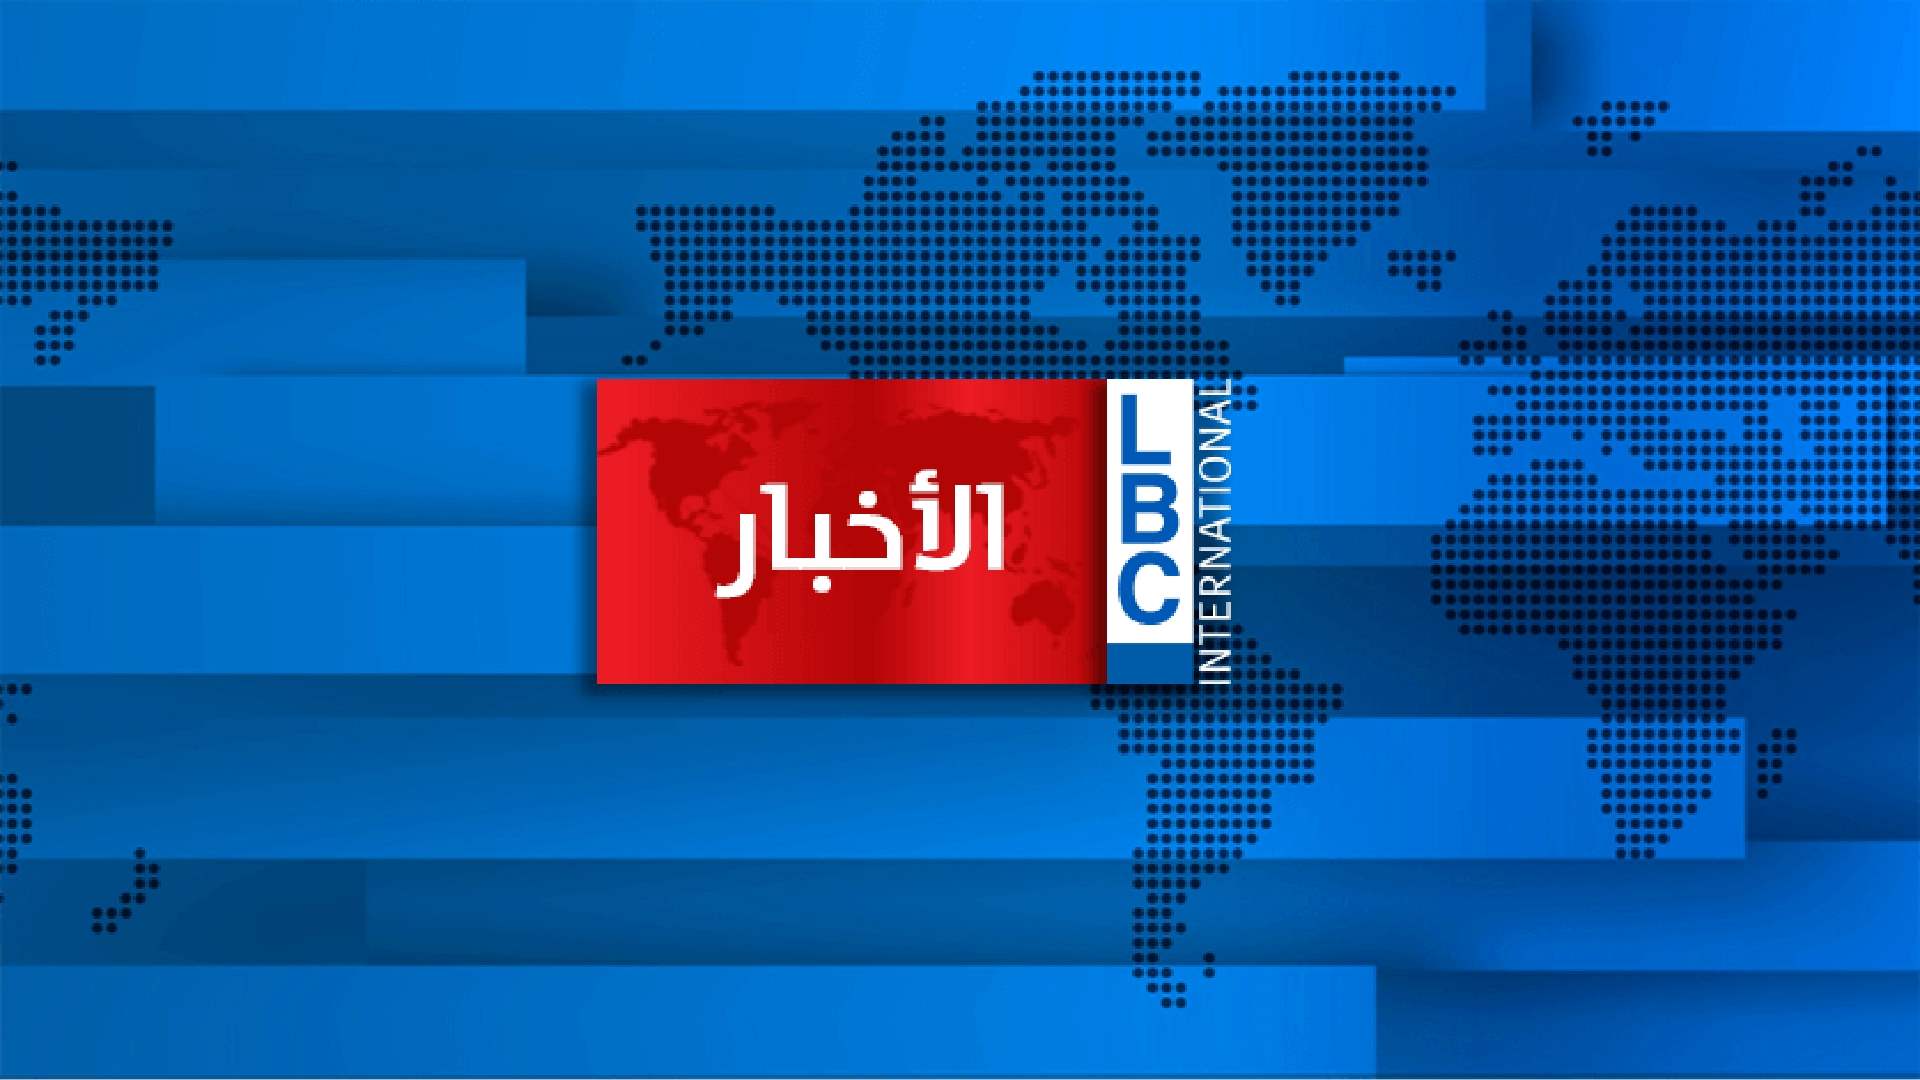 Casino du Liban Chairman Roland Khoury to LBCI: I received a phone call from President Michel Aoun asking me to close the casino to help in limiting the spread of Coronavirus